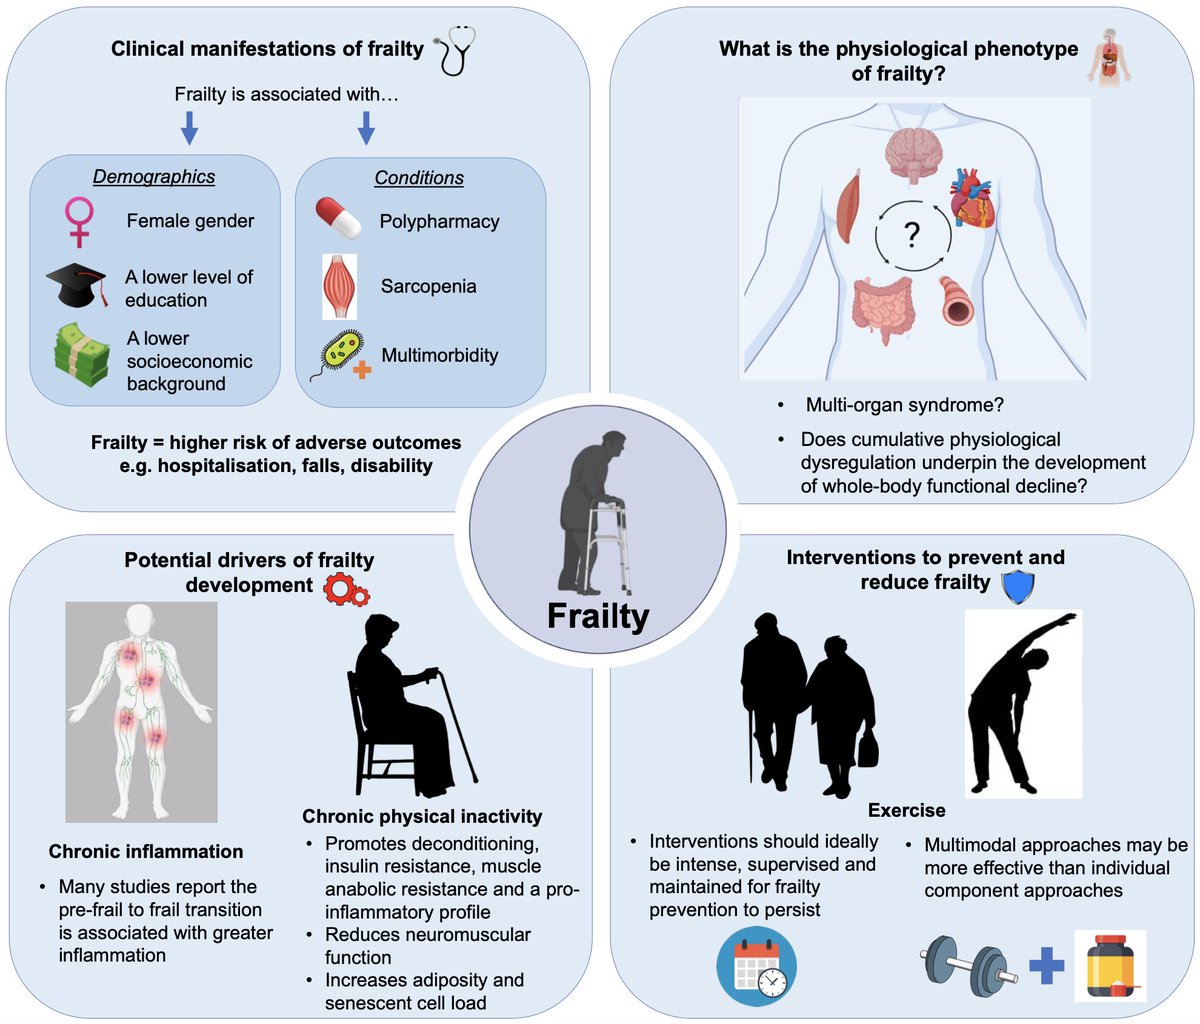 A Multisystem Physiological Perspective of Human Frailty and Its Modulation by Physical Activity… journals.physiology.org/doi/abs/10.115…